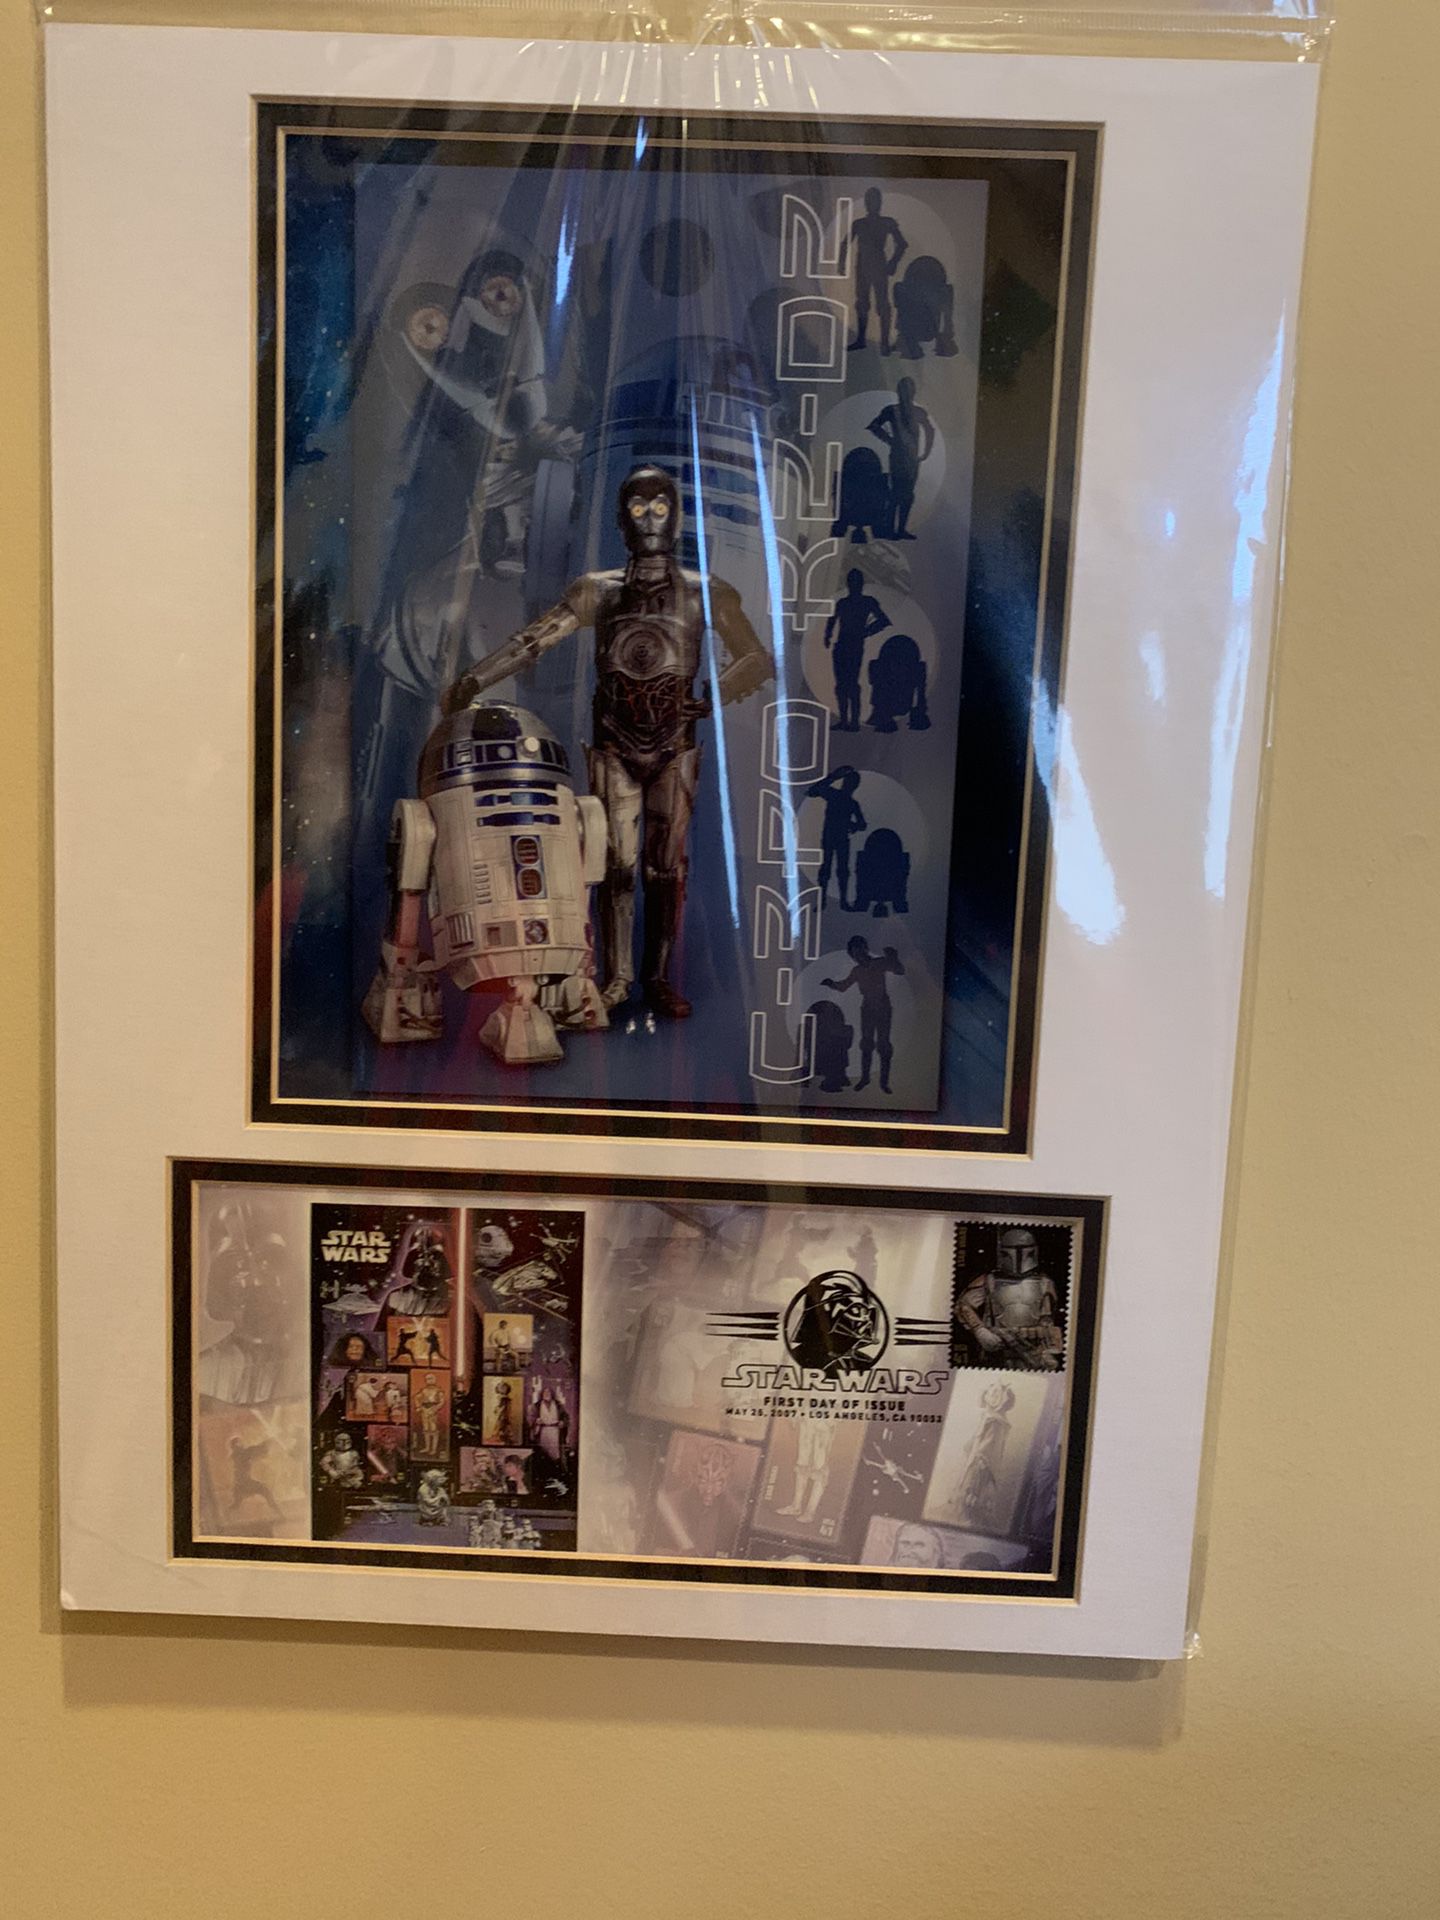 Star wars c3po and r2d2 photo/cover